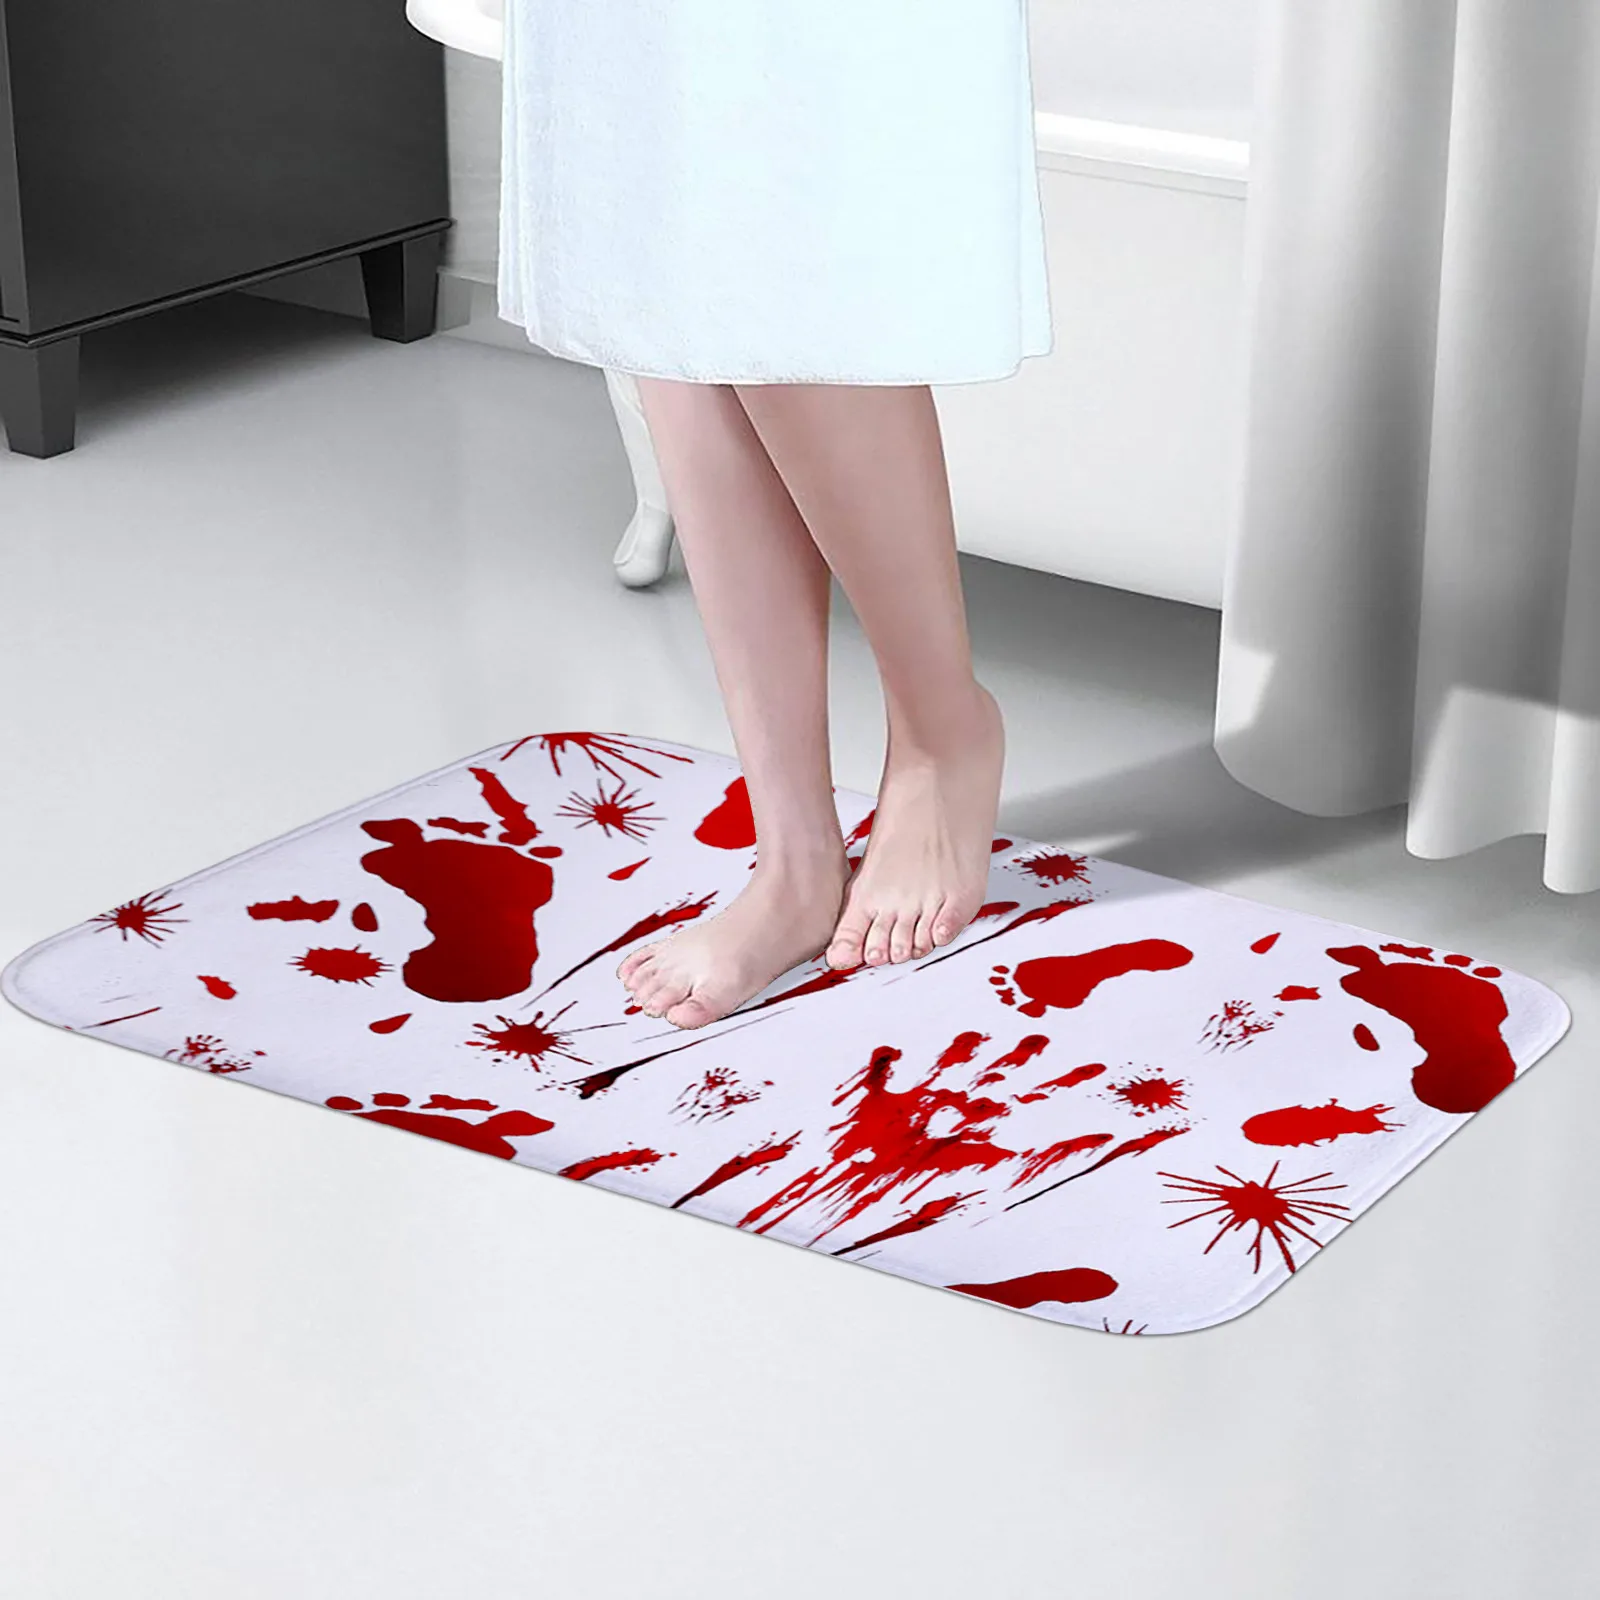 Halloween White Bloody Footprint Carpet Floor Runner Party Decoration Accessory 